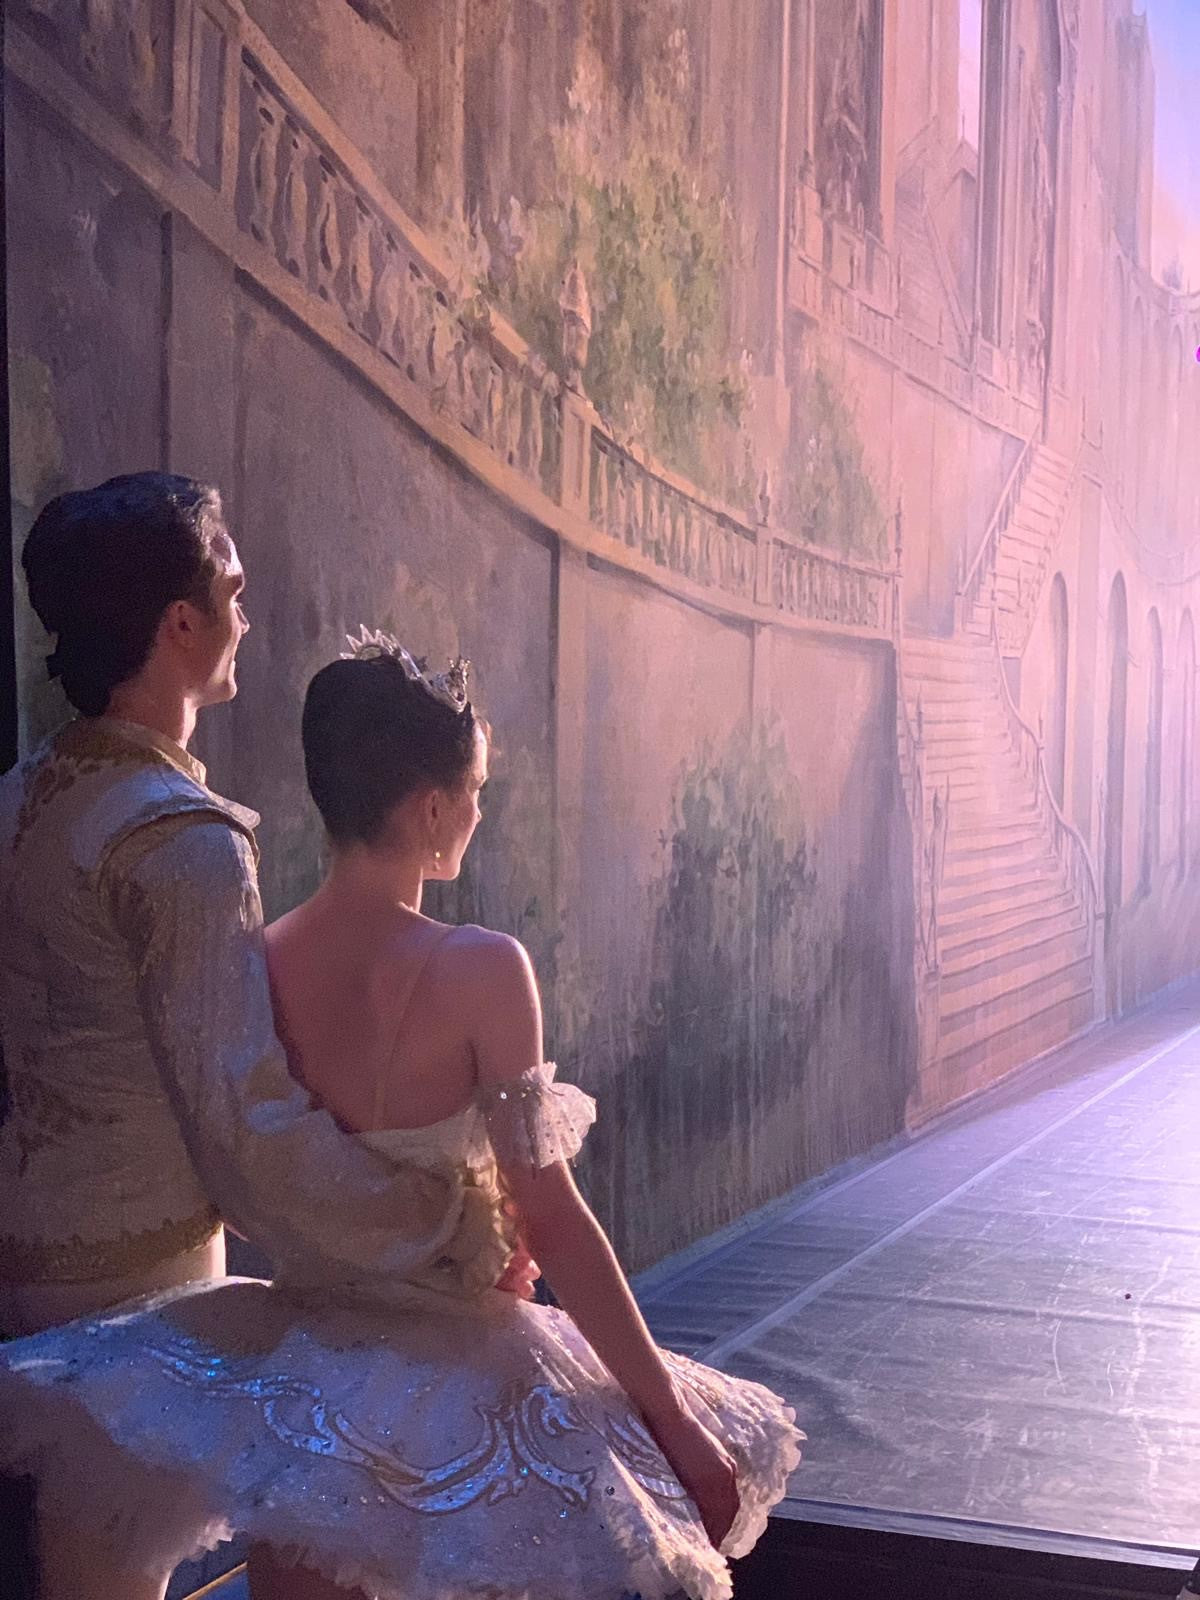 Ballet dancer Anna Rose O'Sullivan waiting in the wings with her partner Matthew Ball to go on stage and perform her debut show